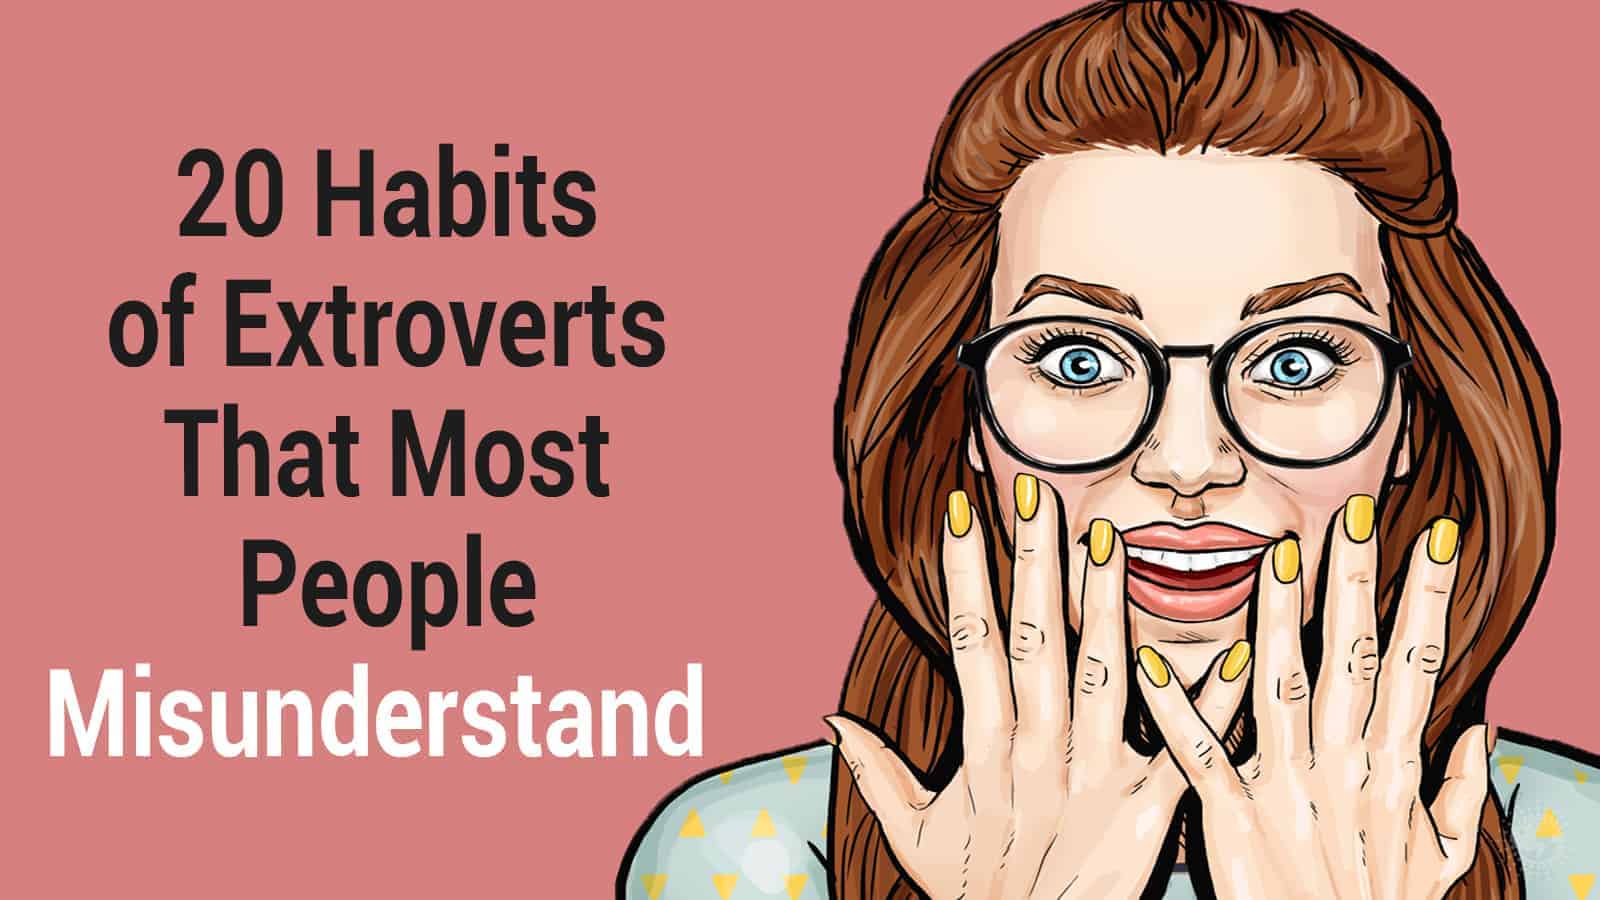 20 Habits of Extroverts That Most People Misunderstand